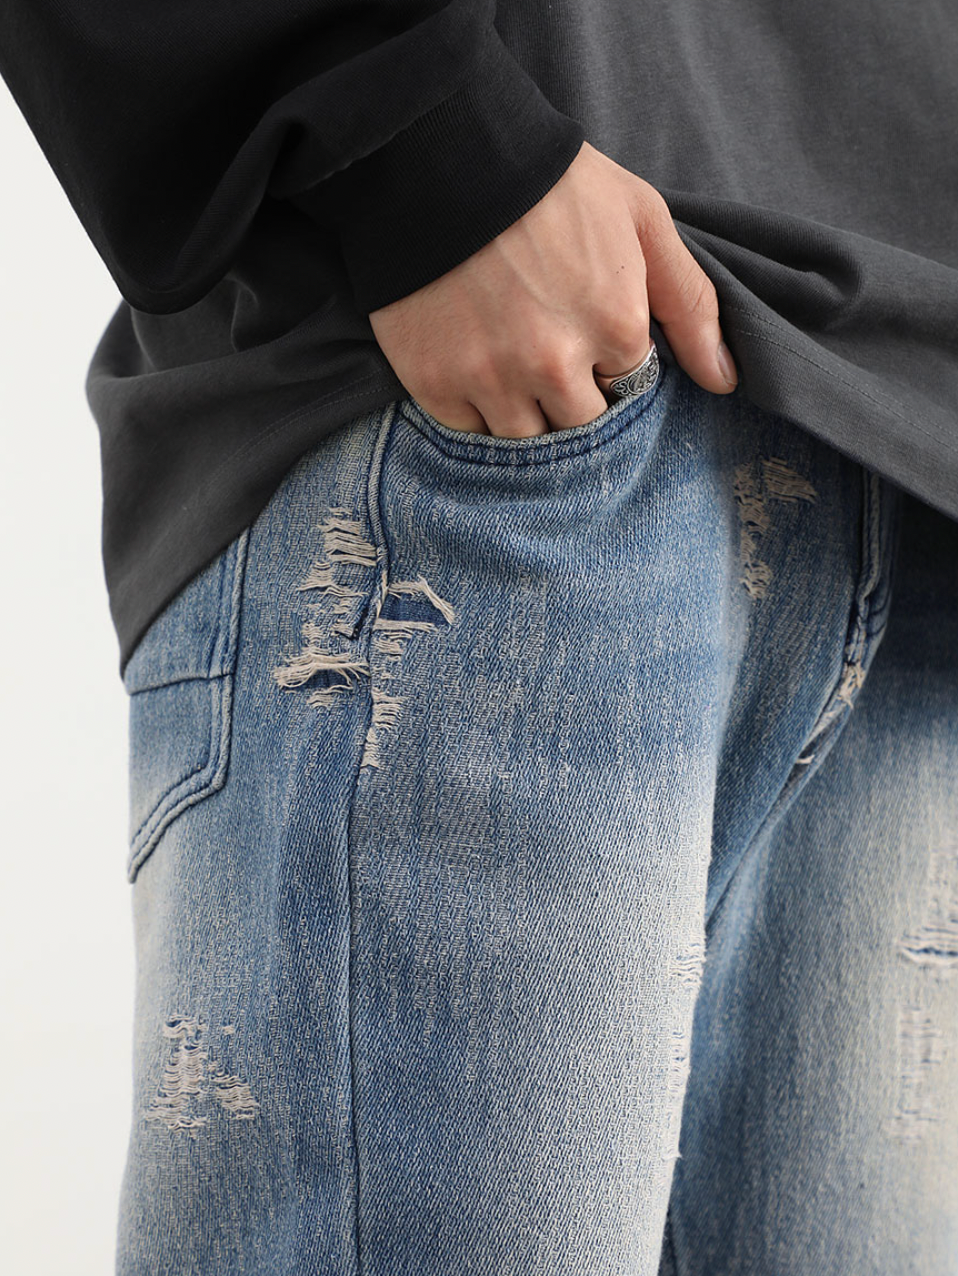 F3F Select Washed And Worn Out Hole Flared Jeans